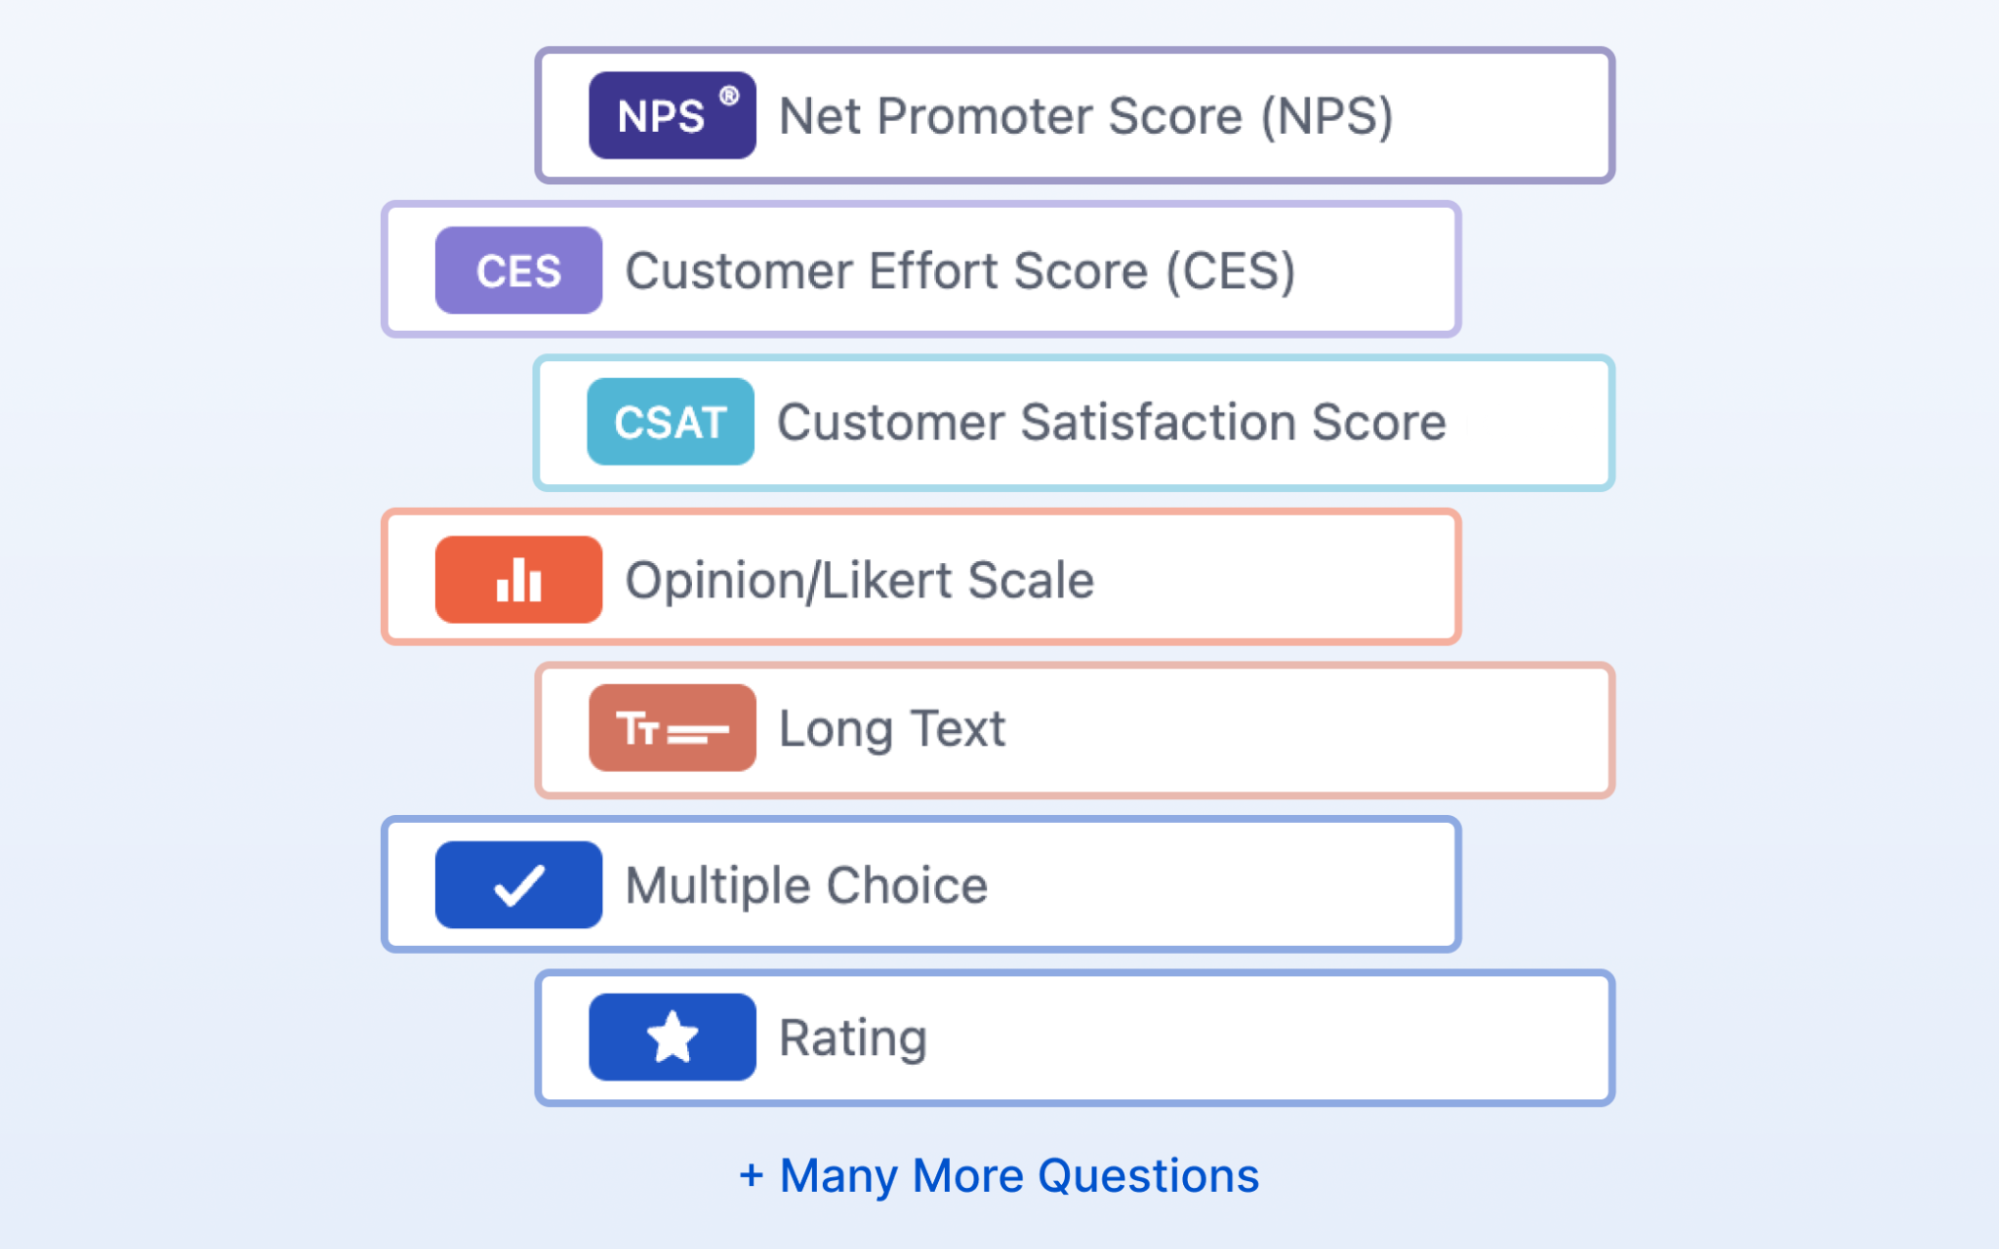  the image shows the variety of question types offered by SurveySensum on their platform while creating surveys for employee feedback. 